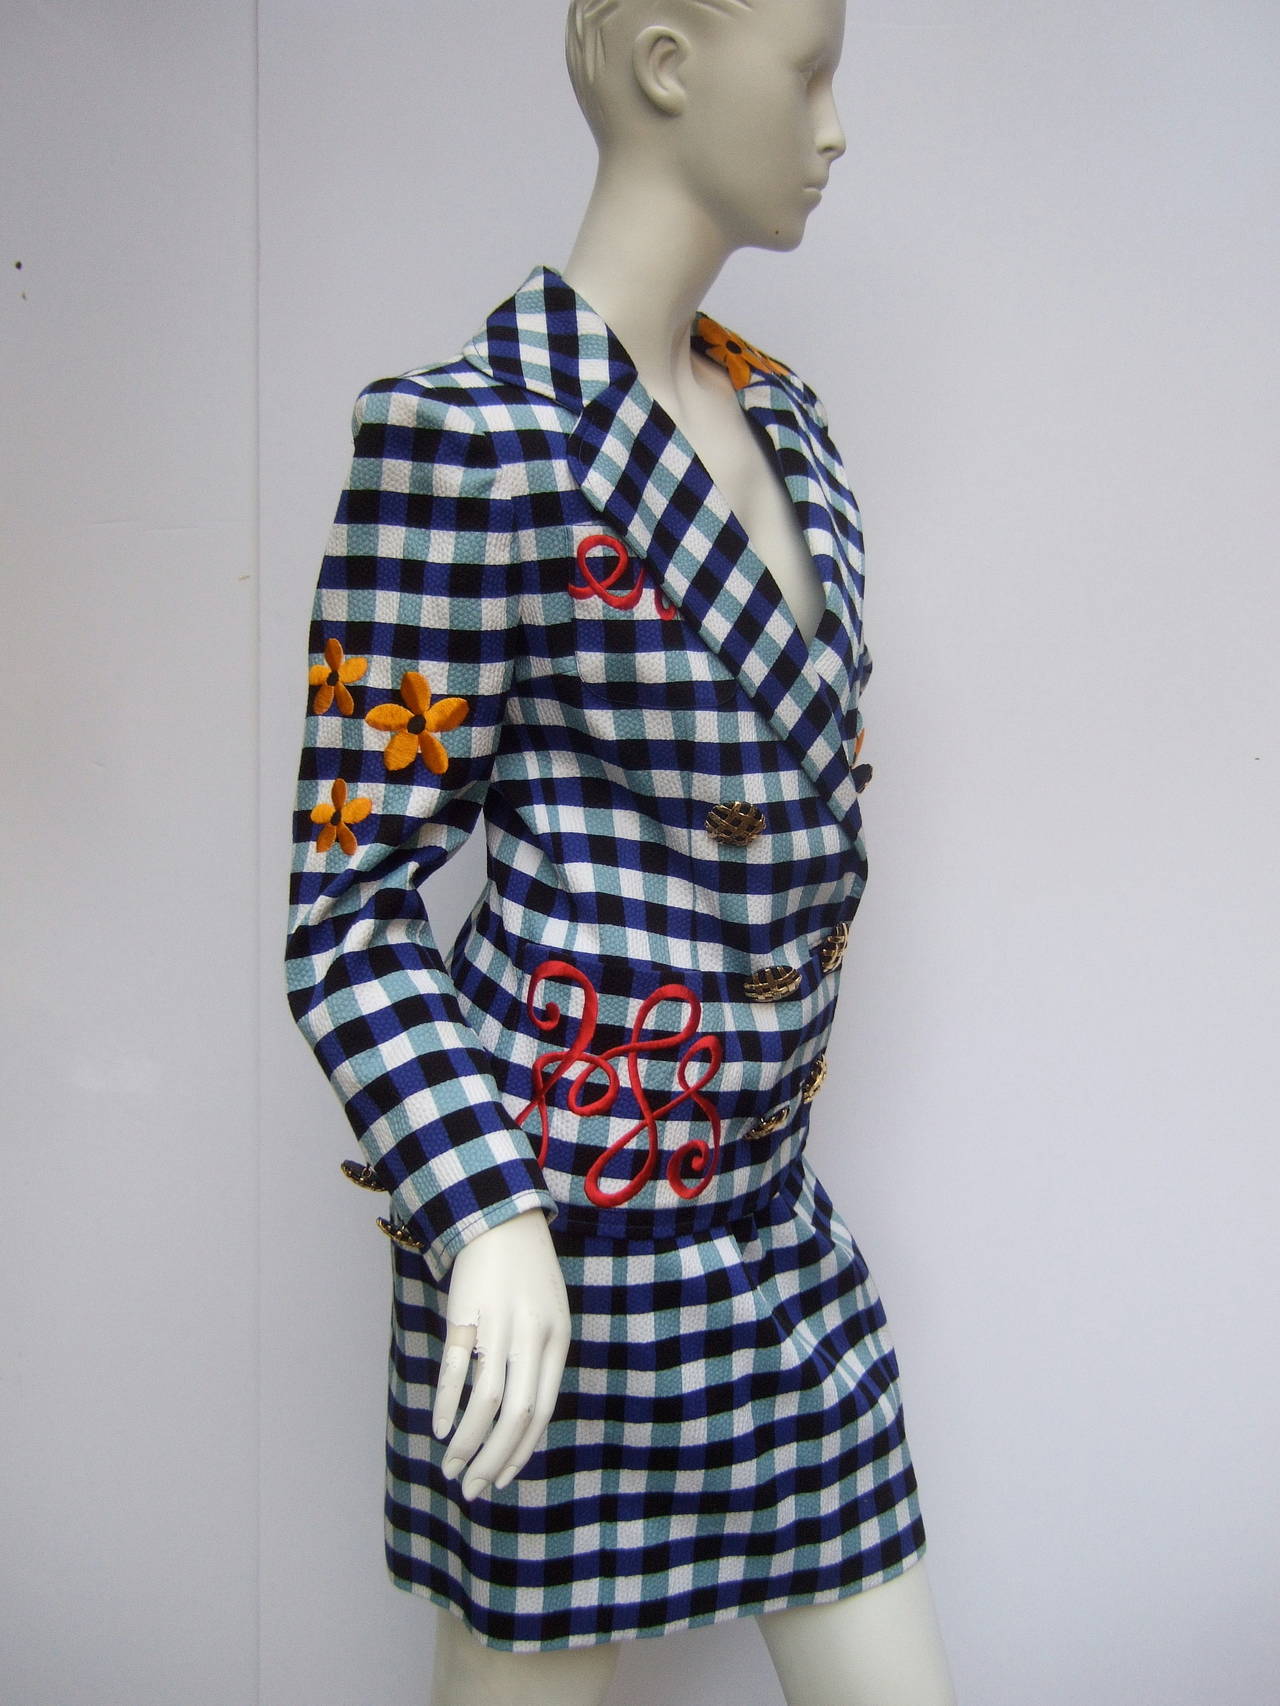 Christian Lacroix Paris Stunning flamboyant skirt suit Size 36
The show stopping suit is designed with a bold checkerboard print with embroidered flowers. The checked print is a combination of pale & cobalt blue The back side of the cotton